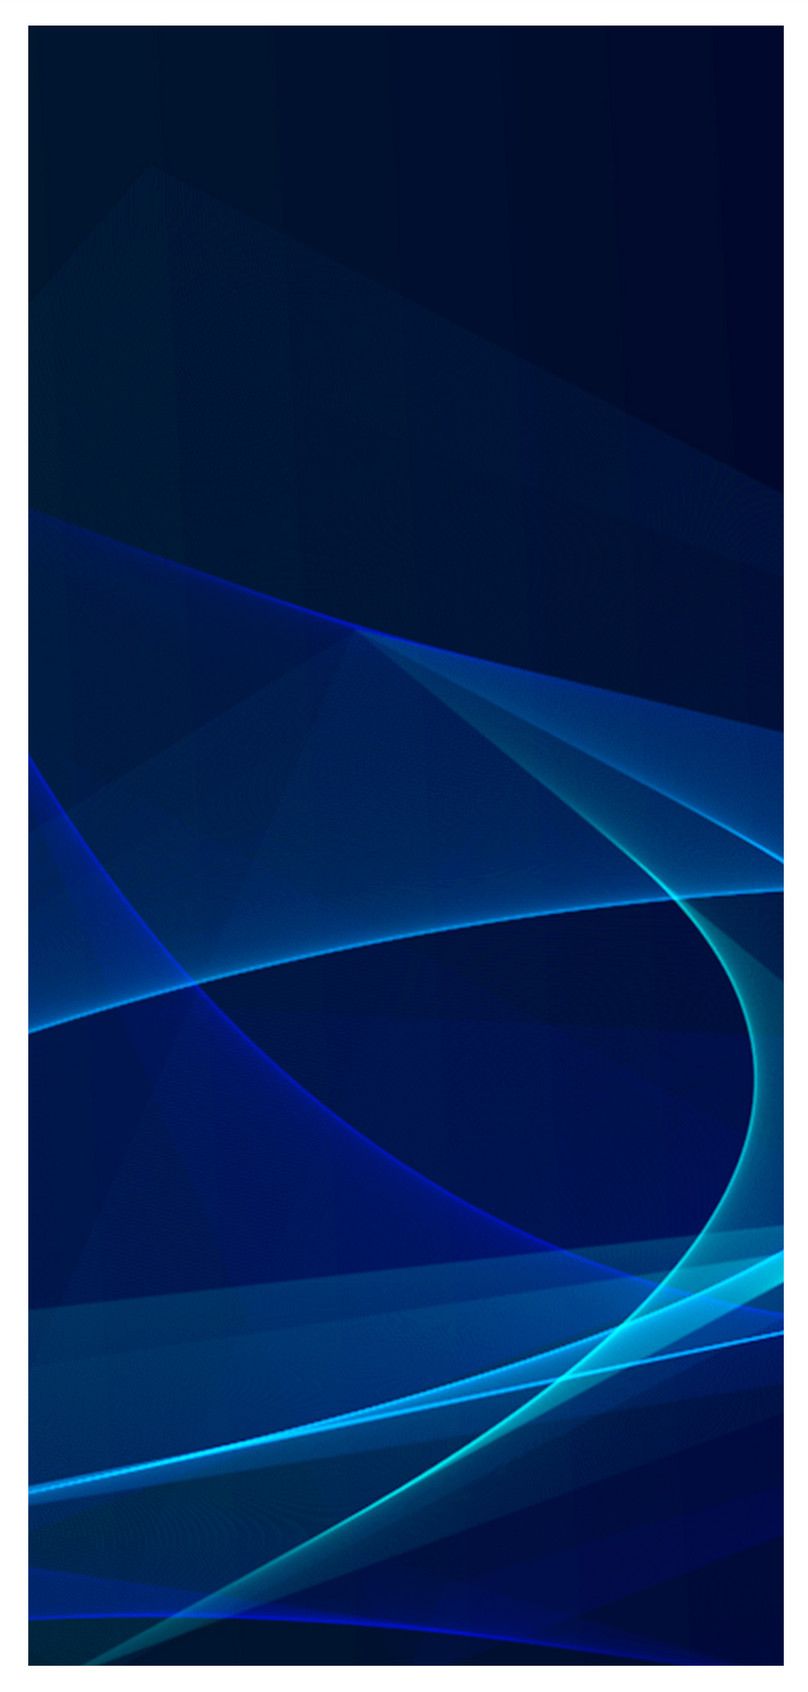 blue gradient background mobile phone wallpaper background image